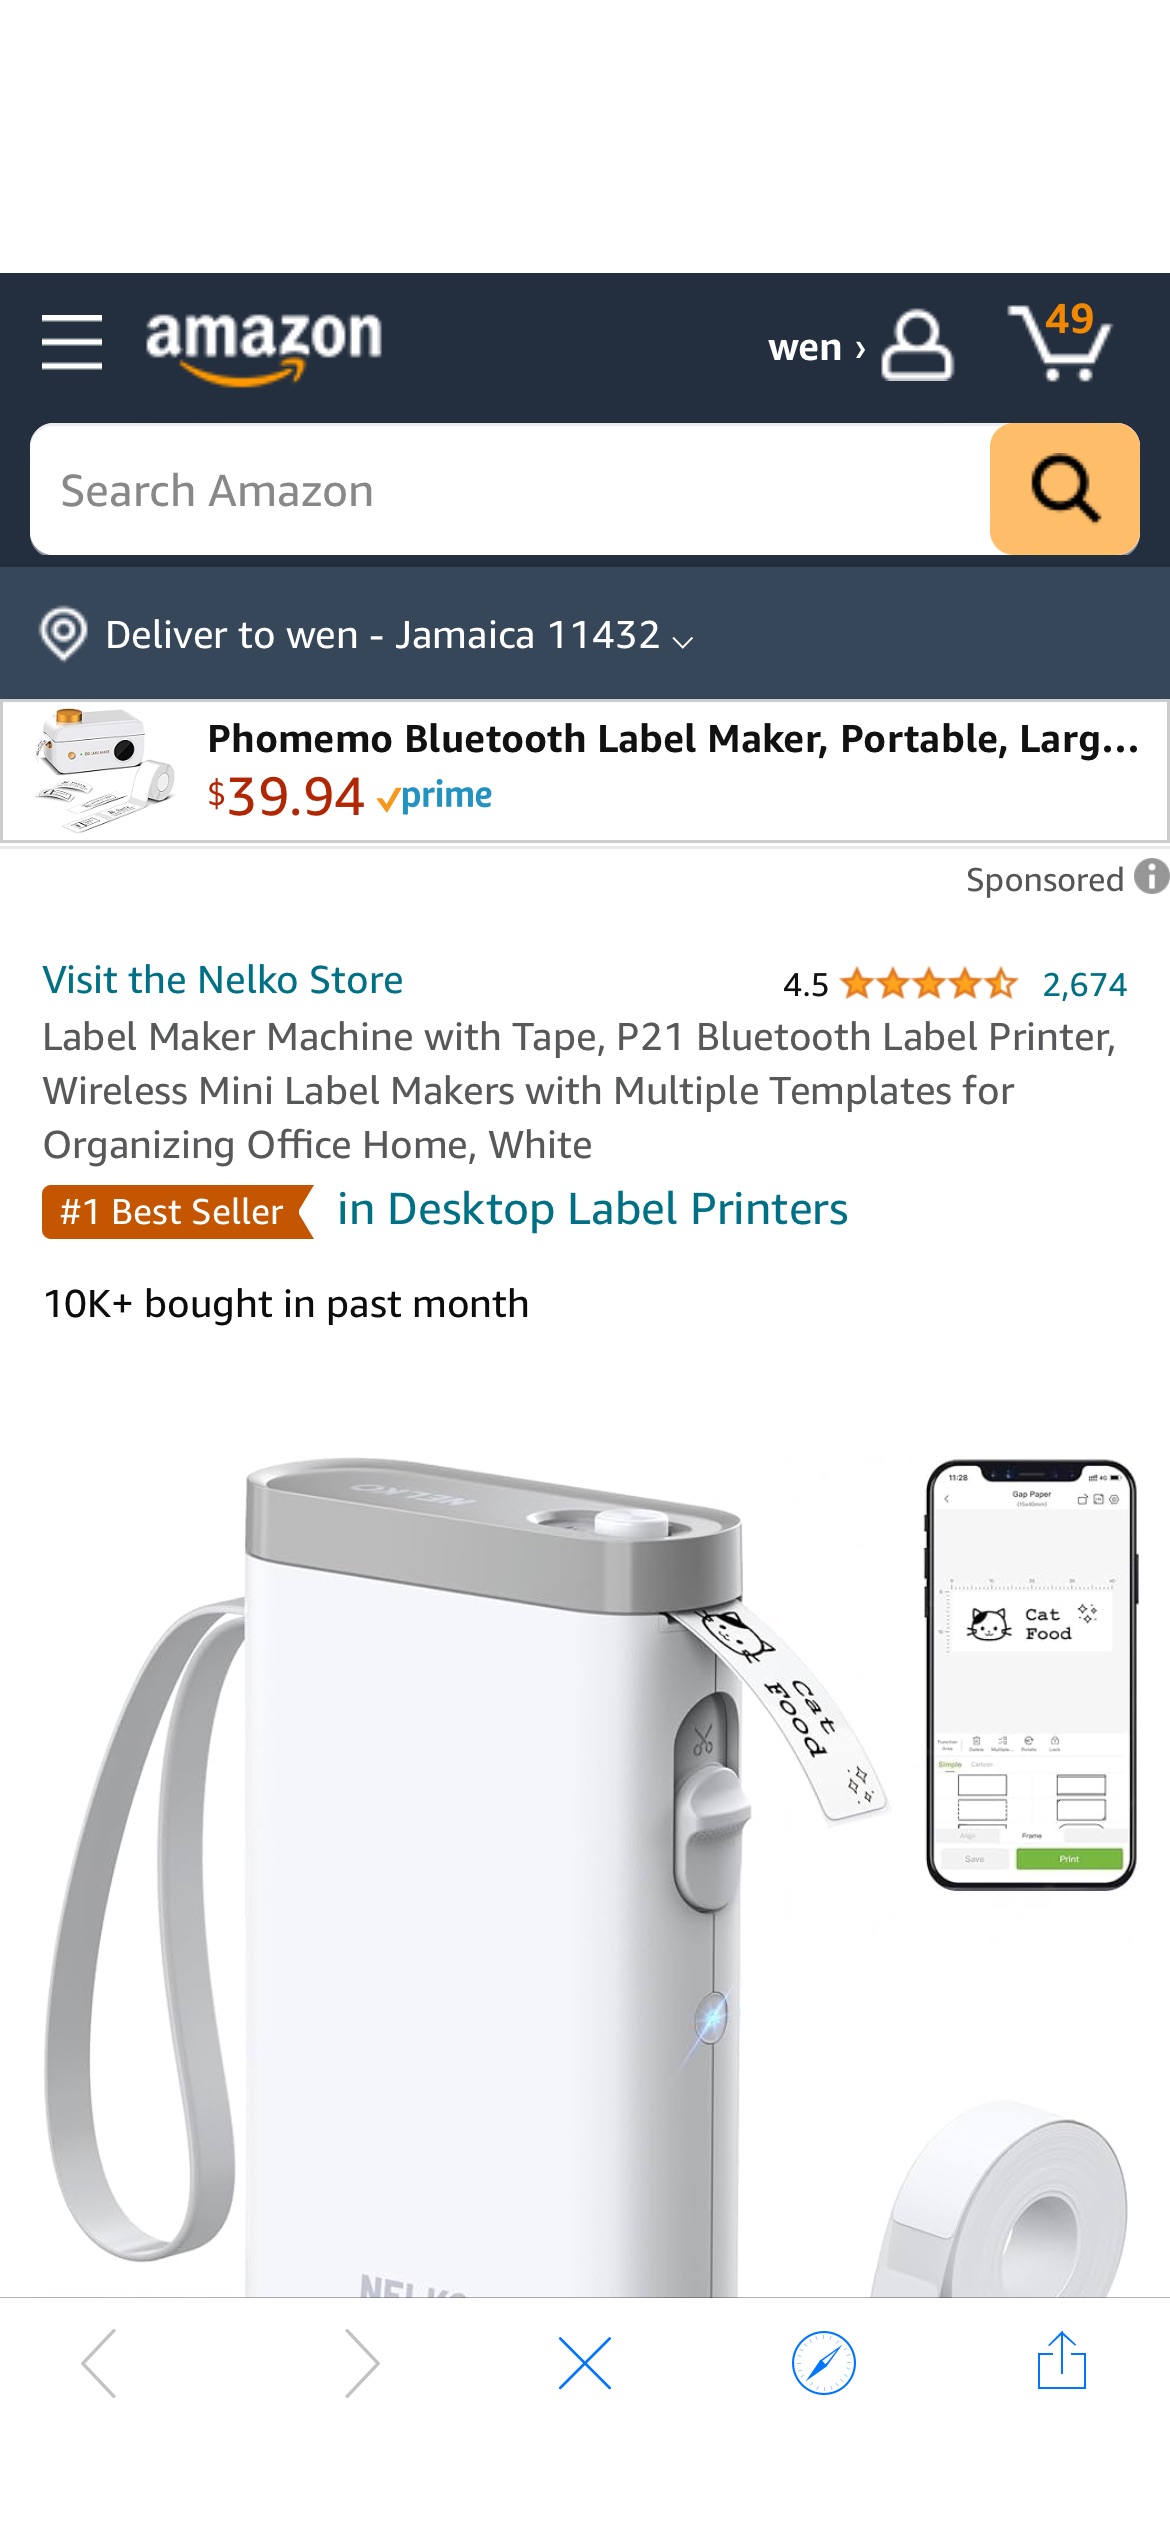 Amazon.com : Nelko Label Maker Machine with Tape, P21 Bluetooth Label Printer, Wireless Mini Label Makers with Multiple Templates for Organizing Office Home, White : Office Products